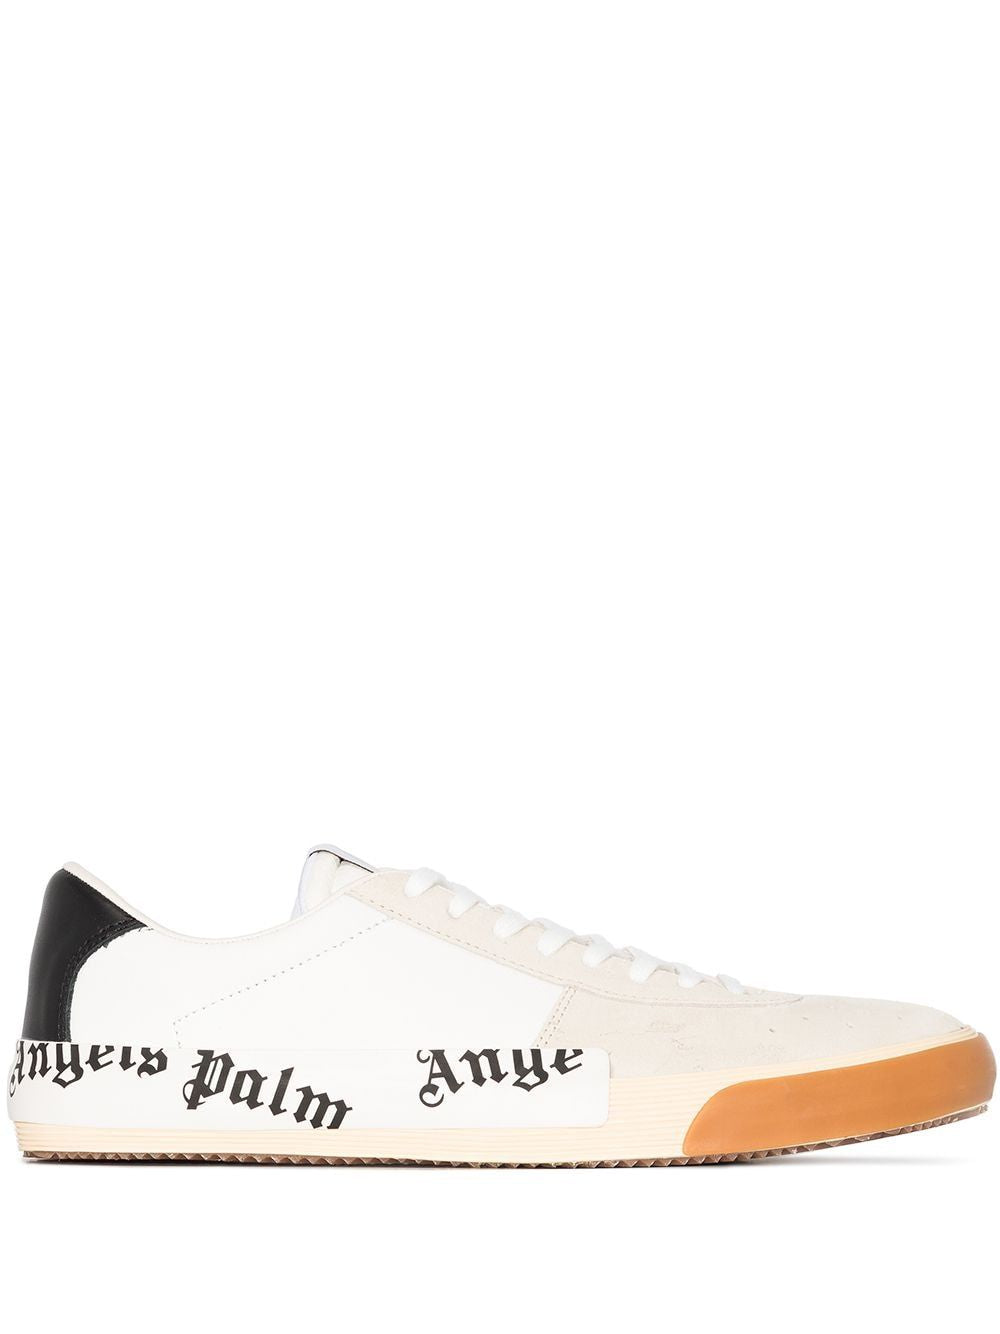 0110 PALM ANGELS VULCANIZED LOW-TOP SNEAKERS